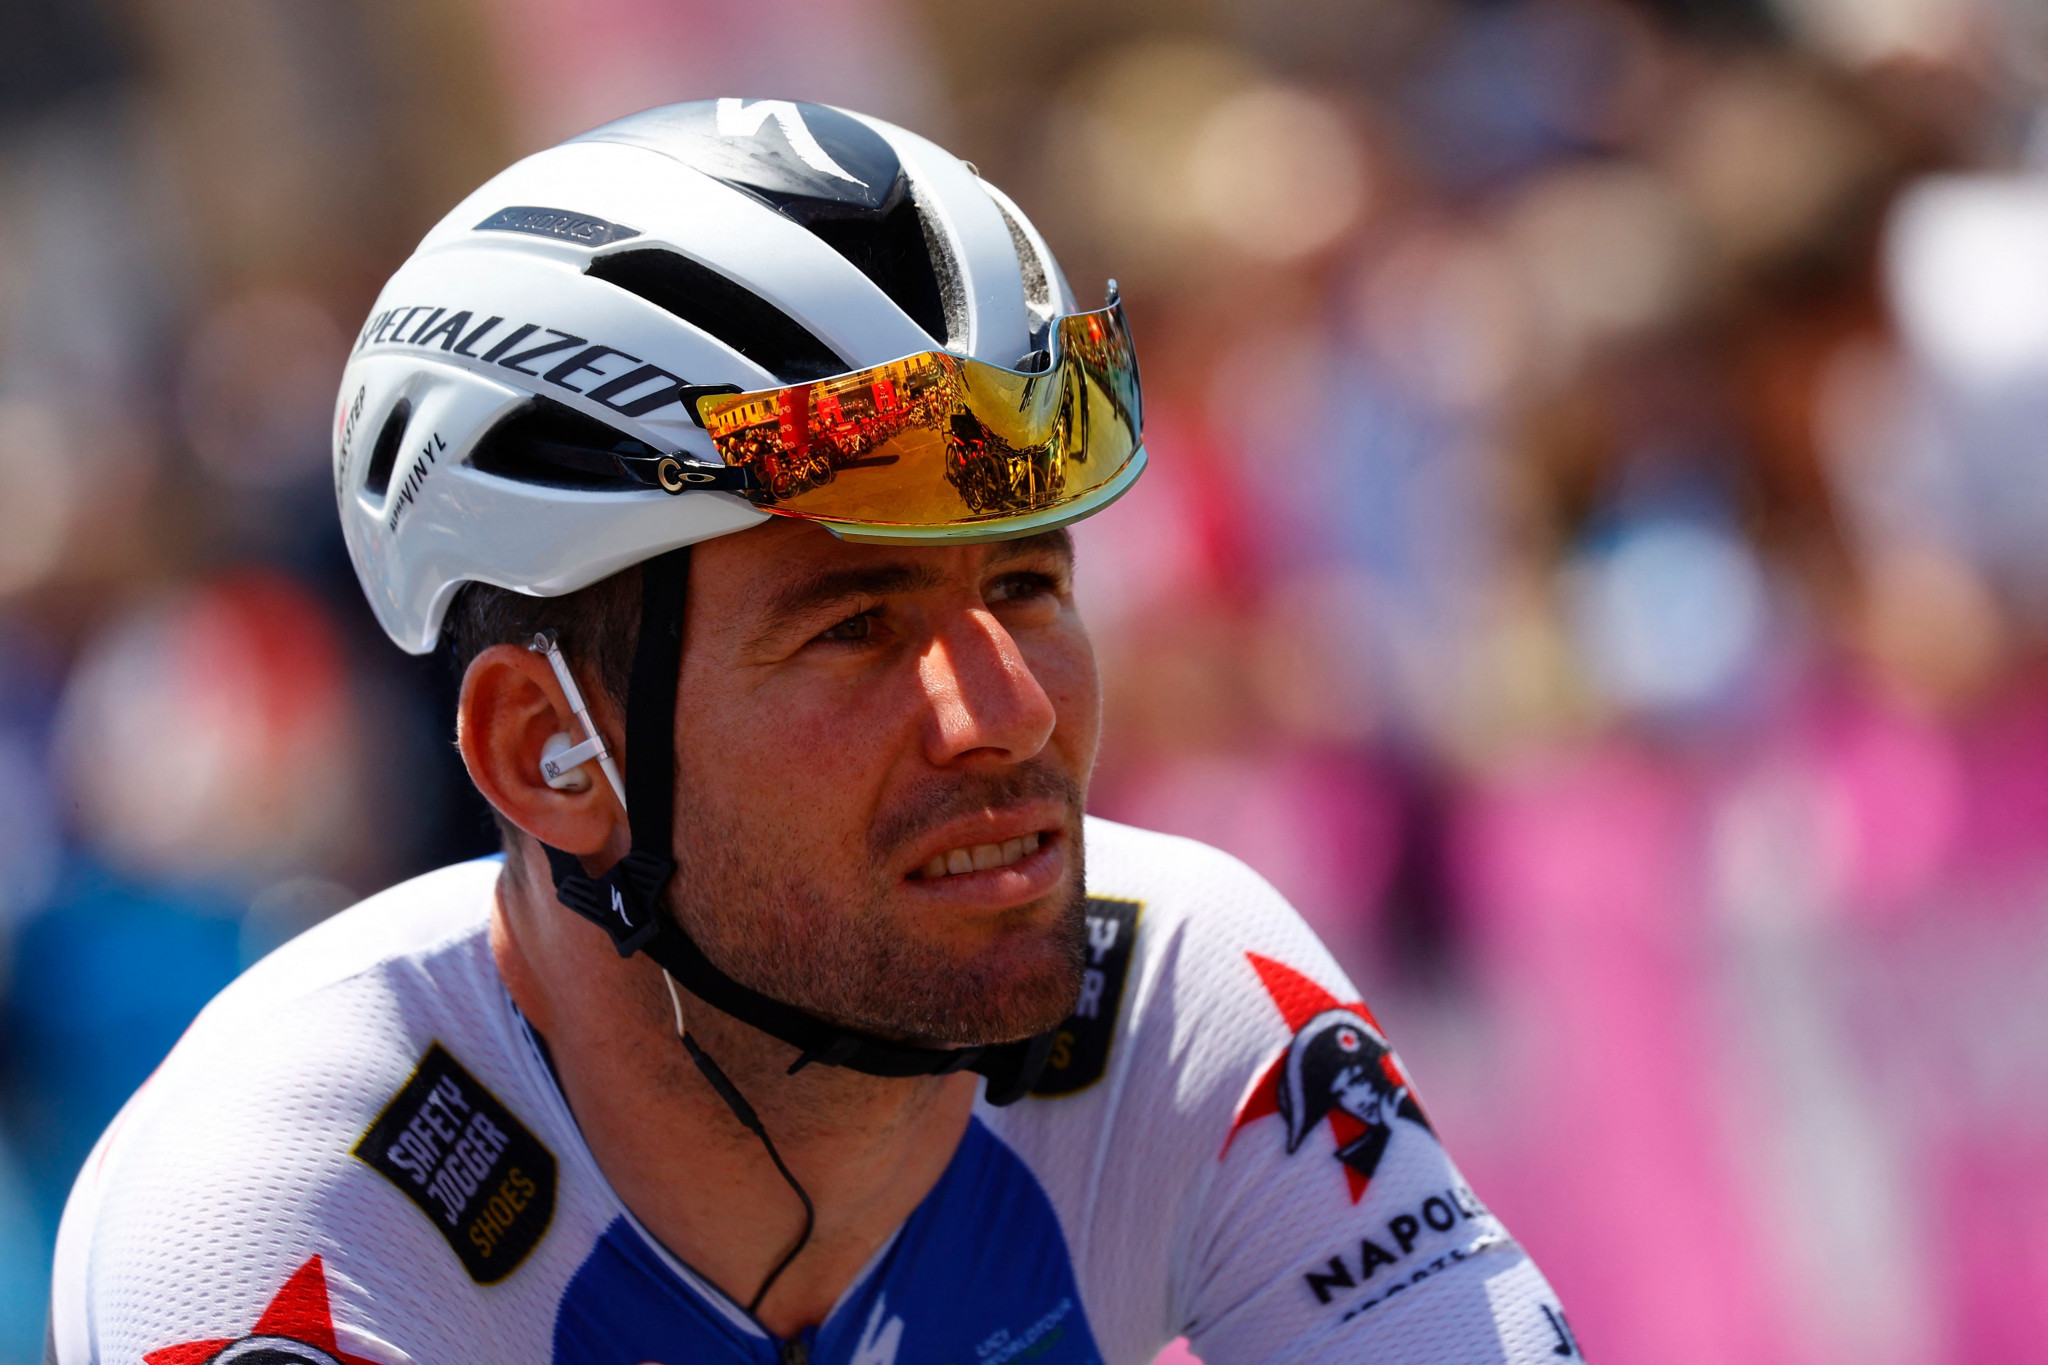 Two men jailed for knifepoint robbery of British cycling star Cavendish